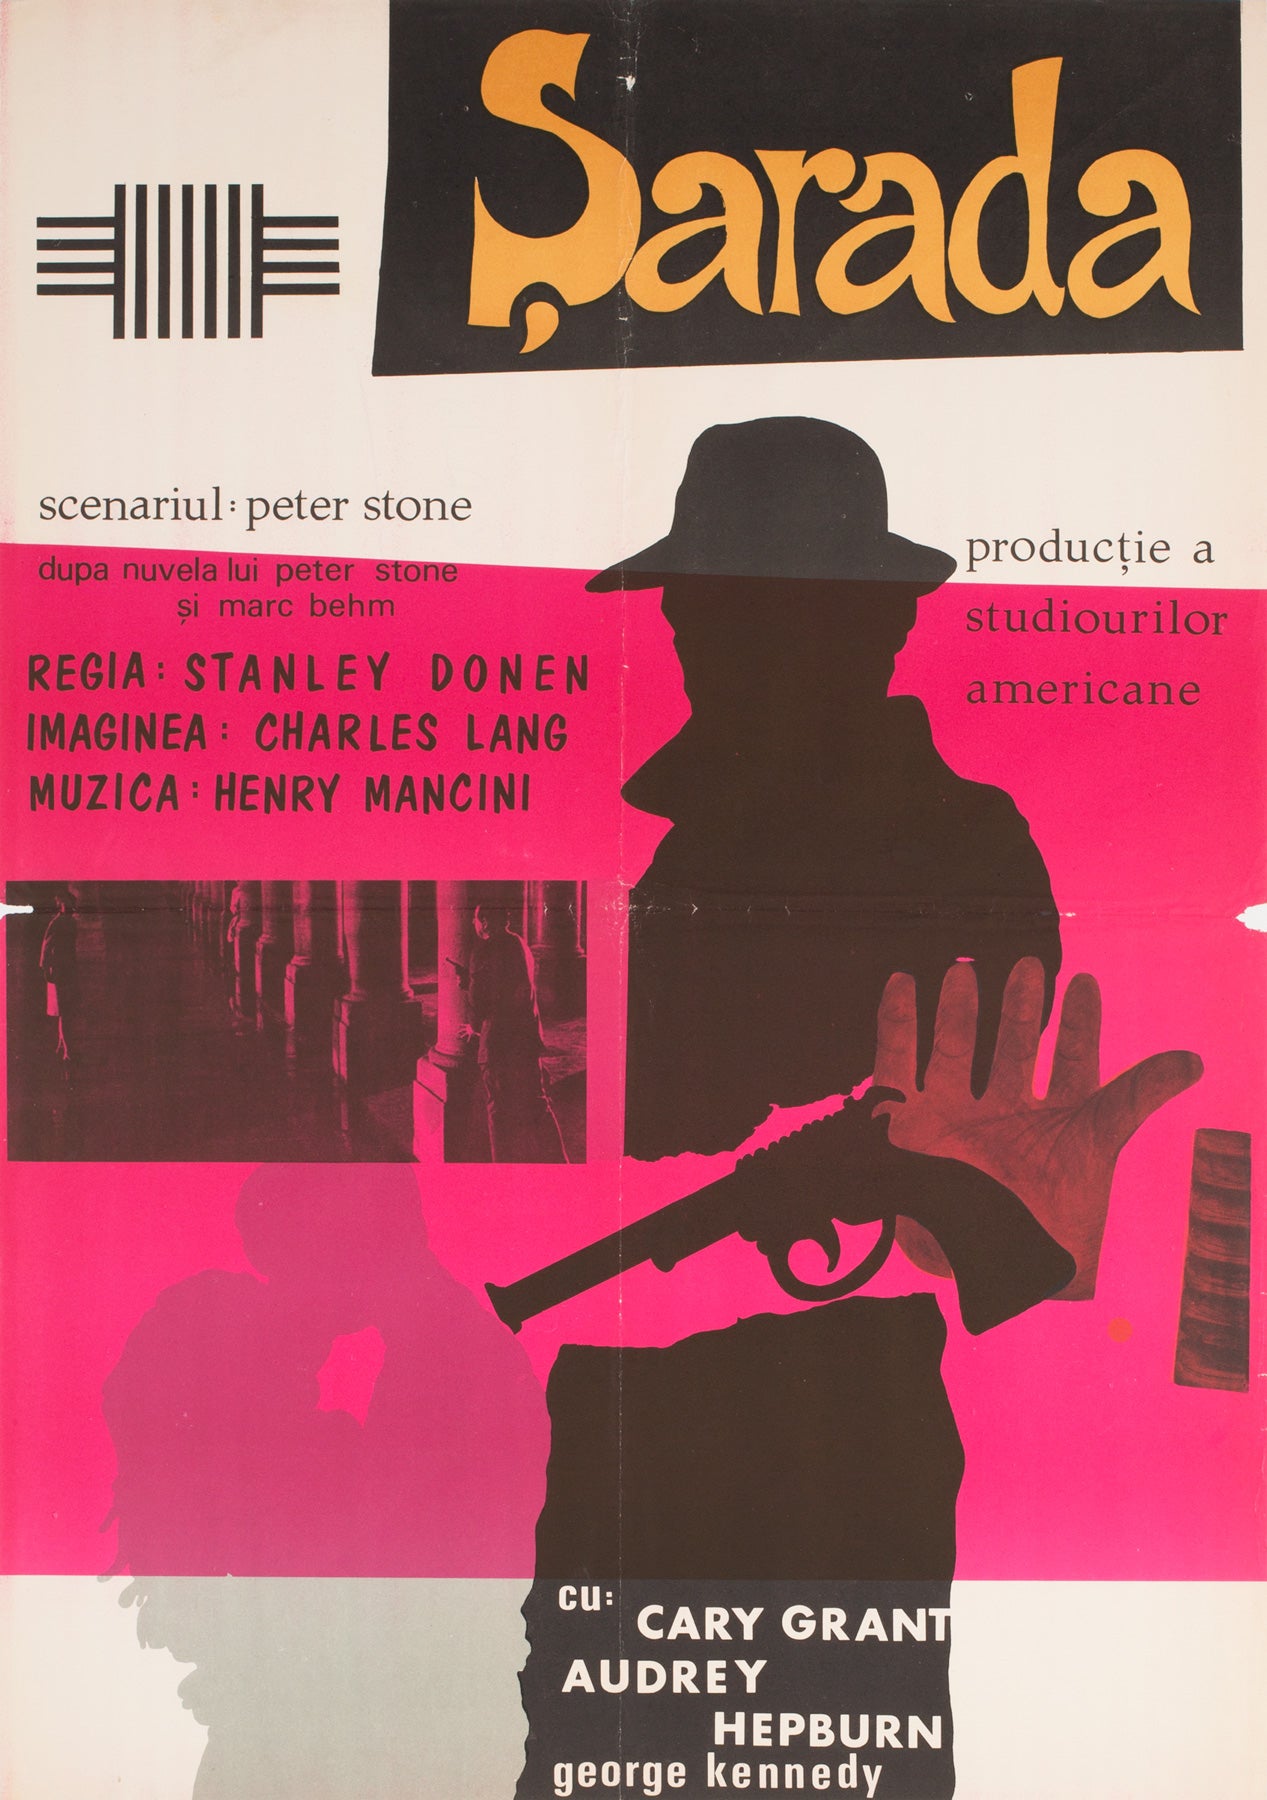 Charade 1963 Romanian Film Poster